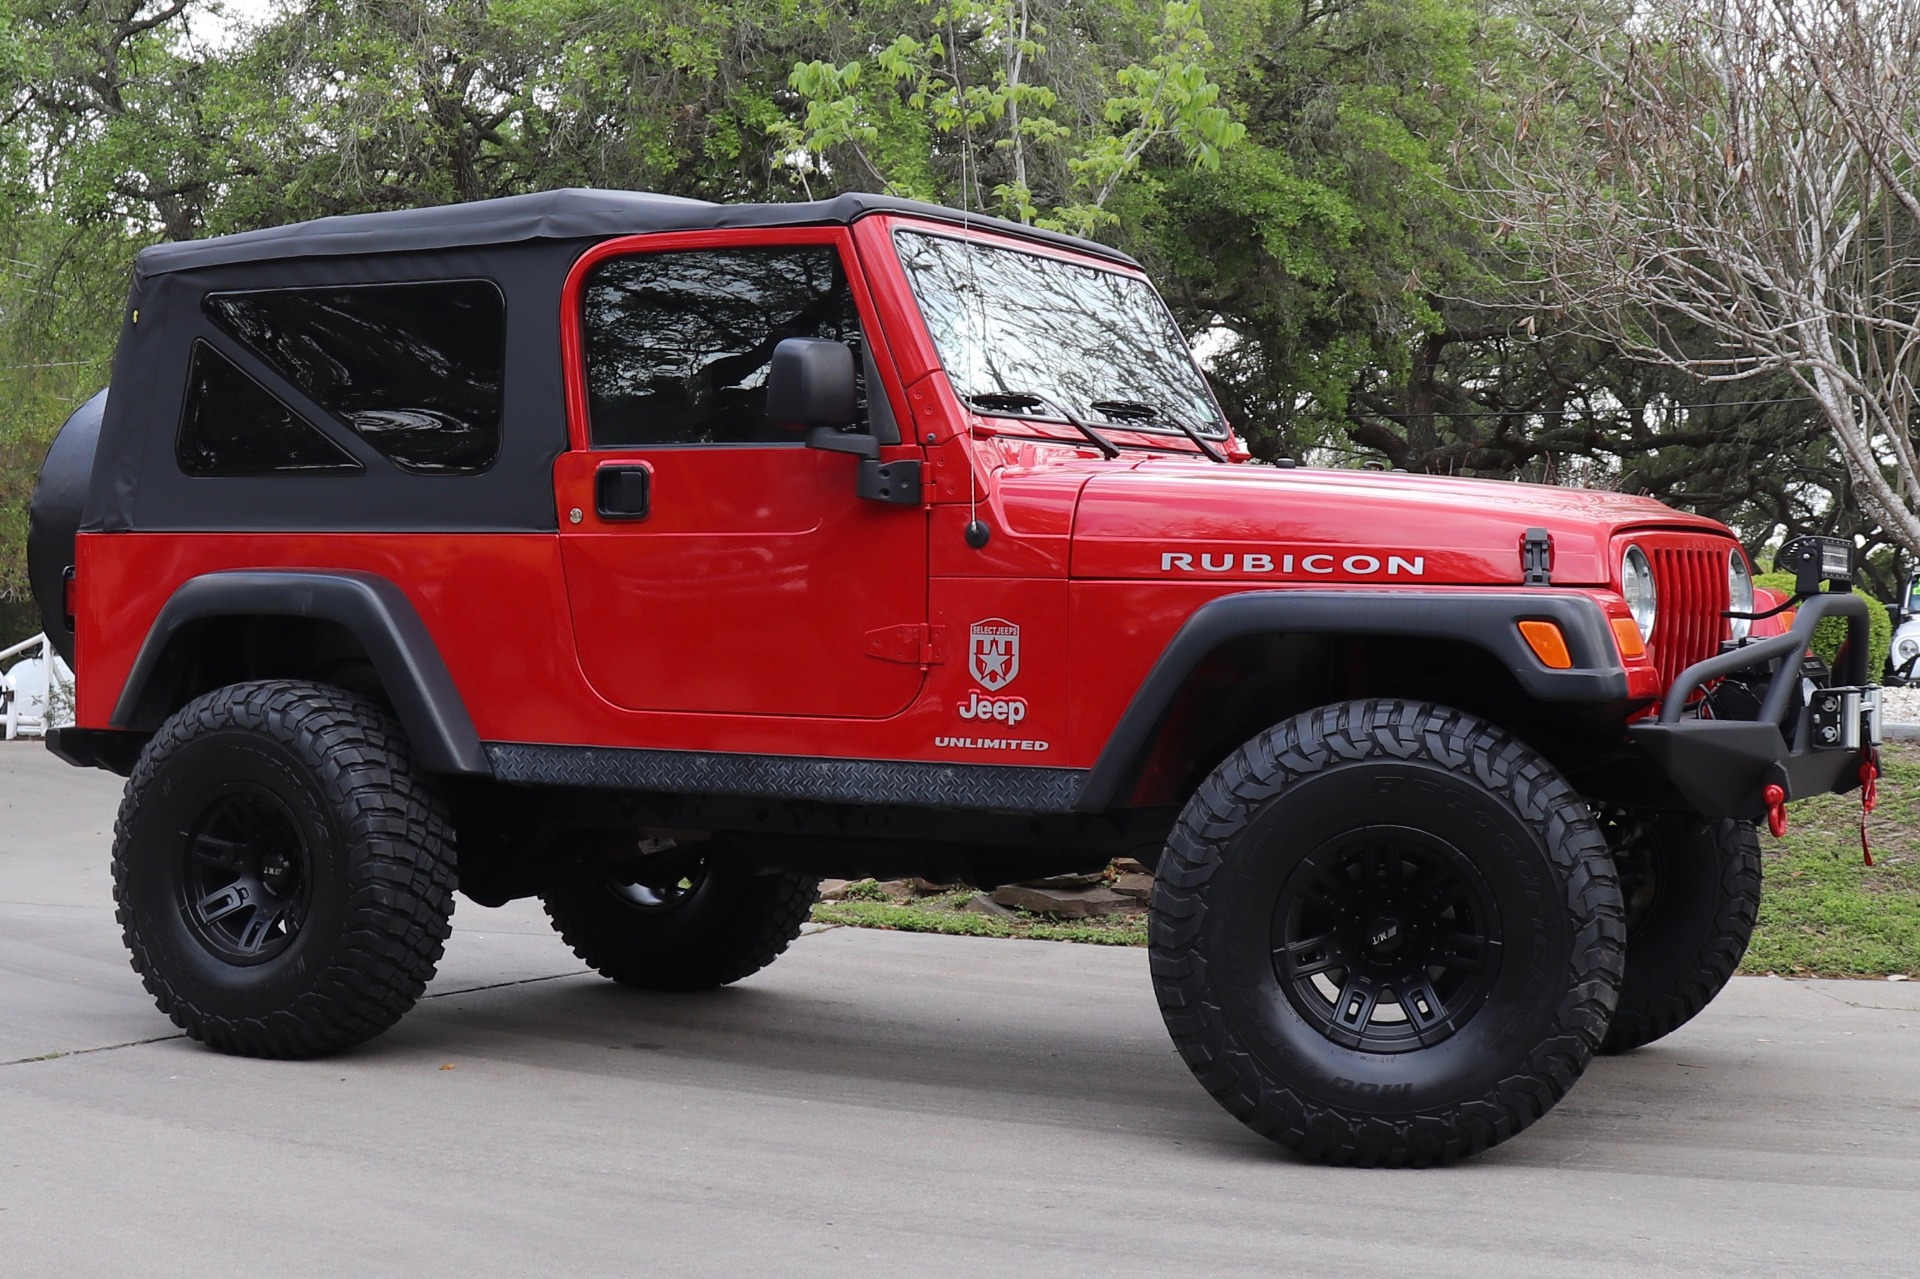 Used 2006 Jeep Wrangler Unlimited Rubicon For Sale ($34,995) | Select Jeeps  Inc. Stock #766723